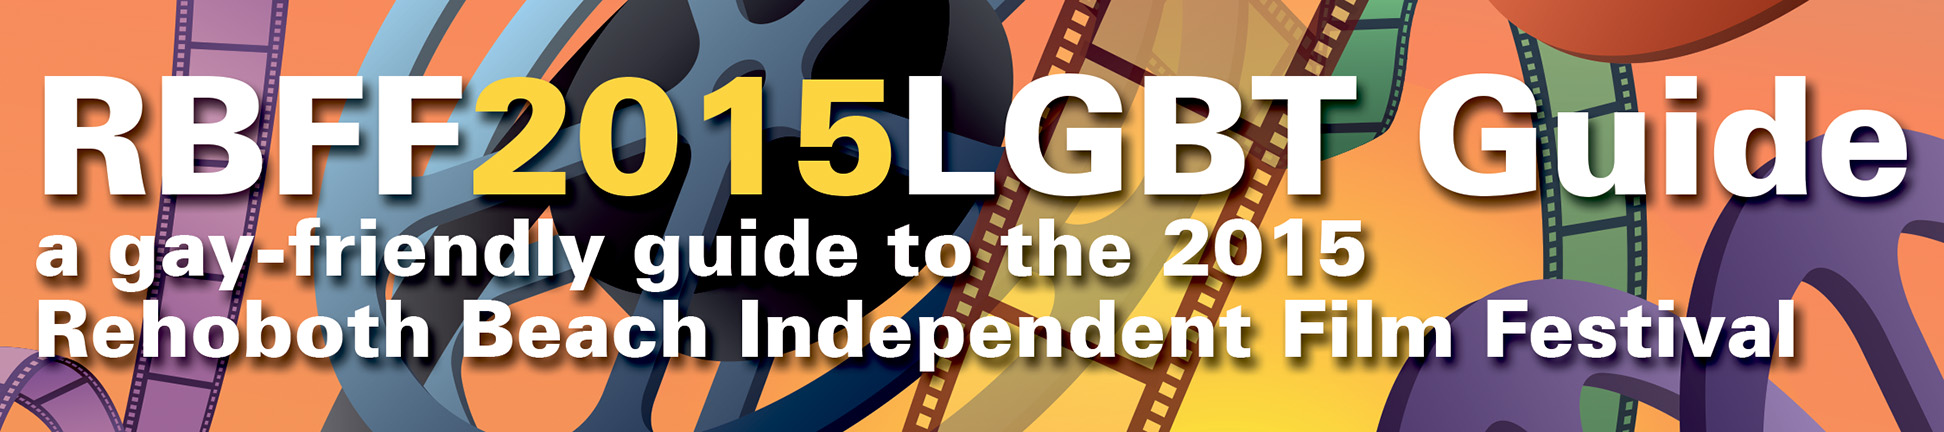 Rehoboth Beach Independent Film Festival LGBT Guide